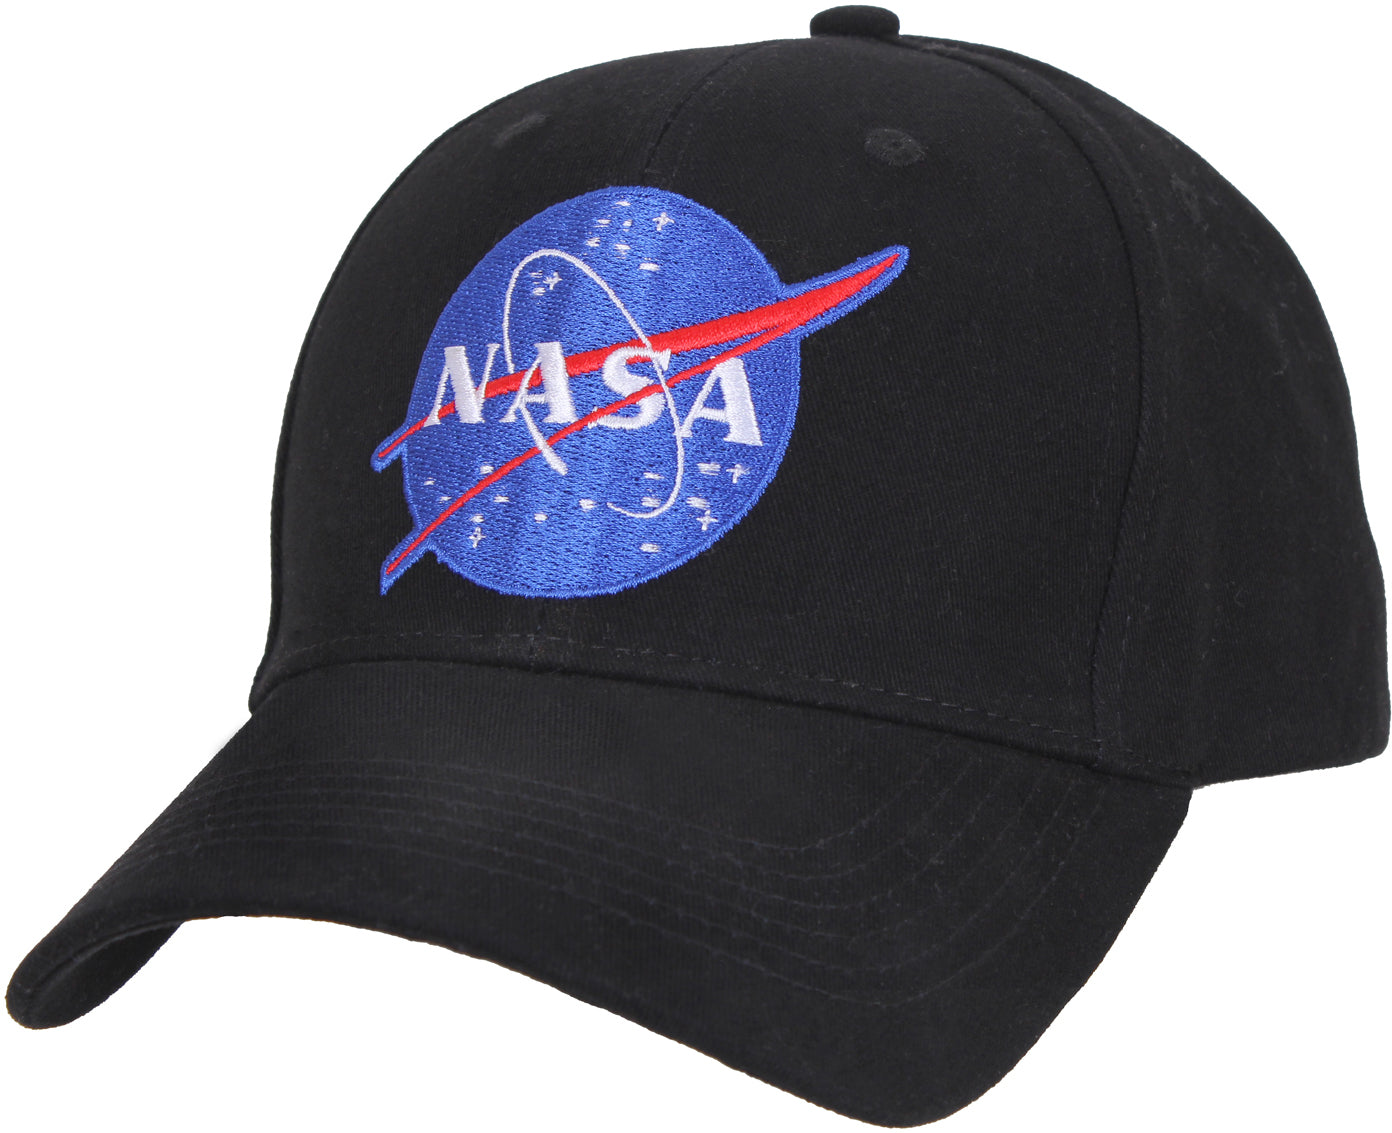 NASA Baseball Hat Meatball Official Space Logo Embroidered Adjustable Dad Cap